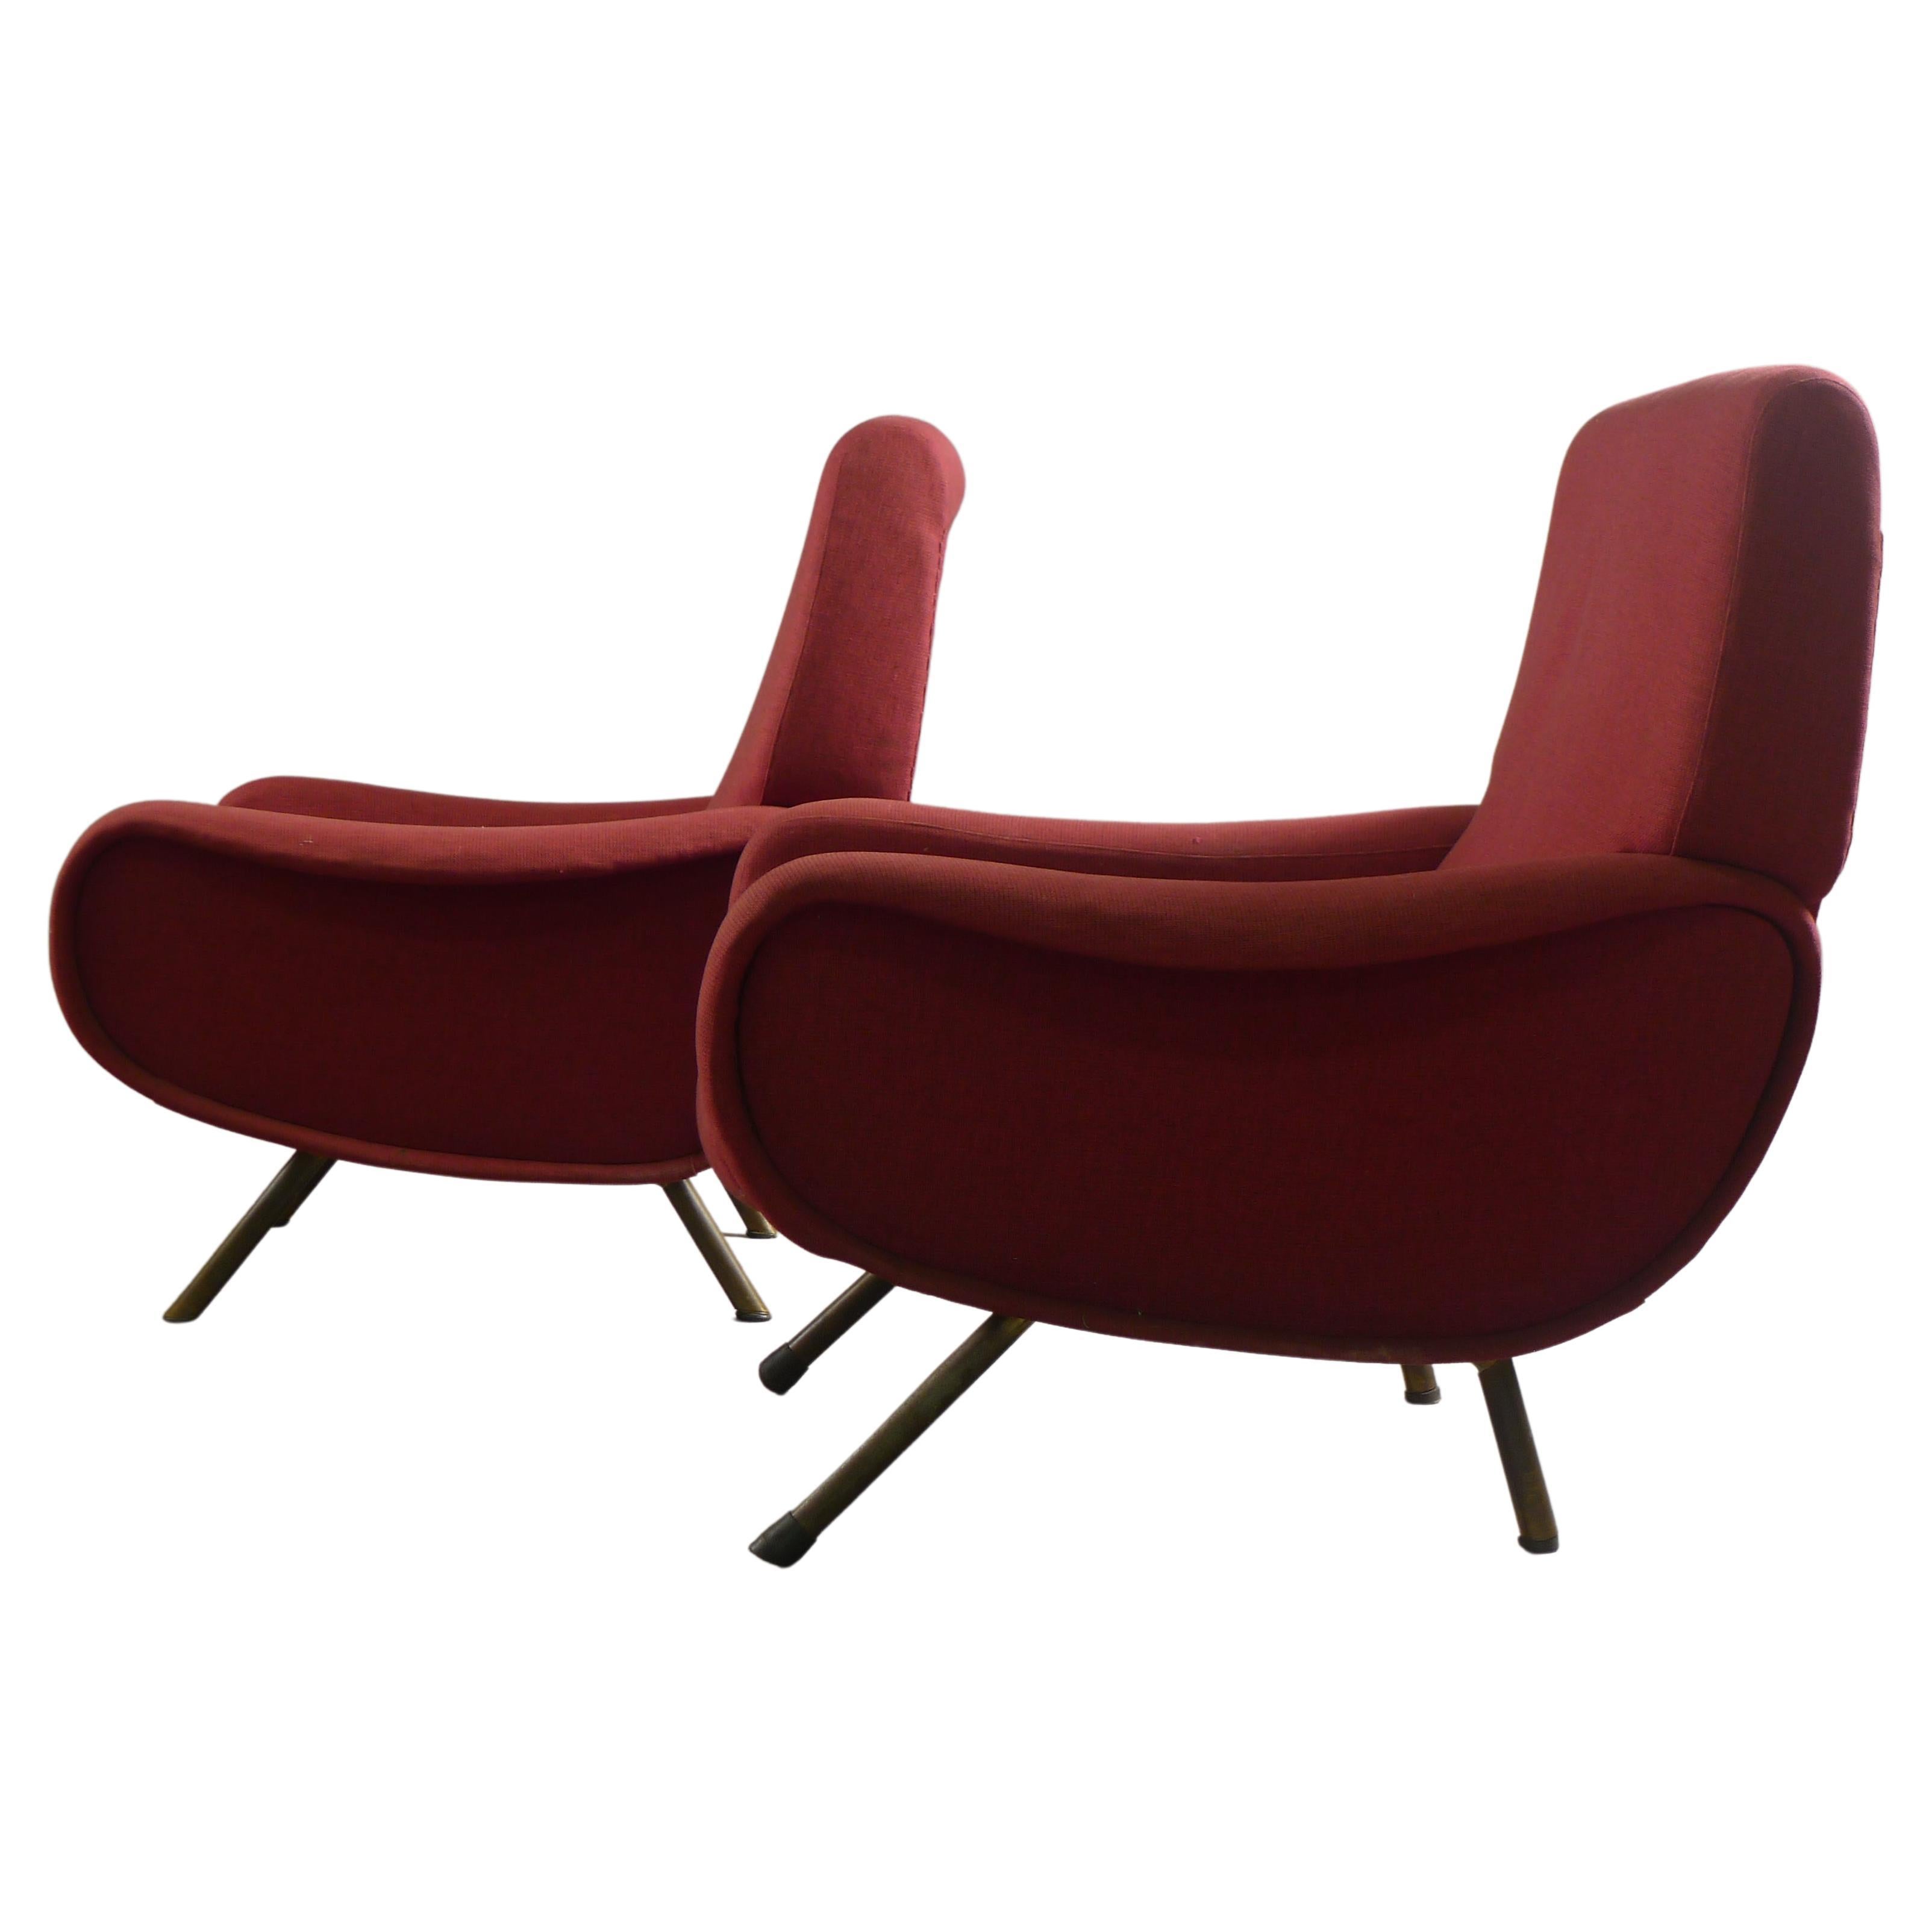 Marco Zanuso for Arflex, Italy, a Pair of Original "Lady" Armchairs